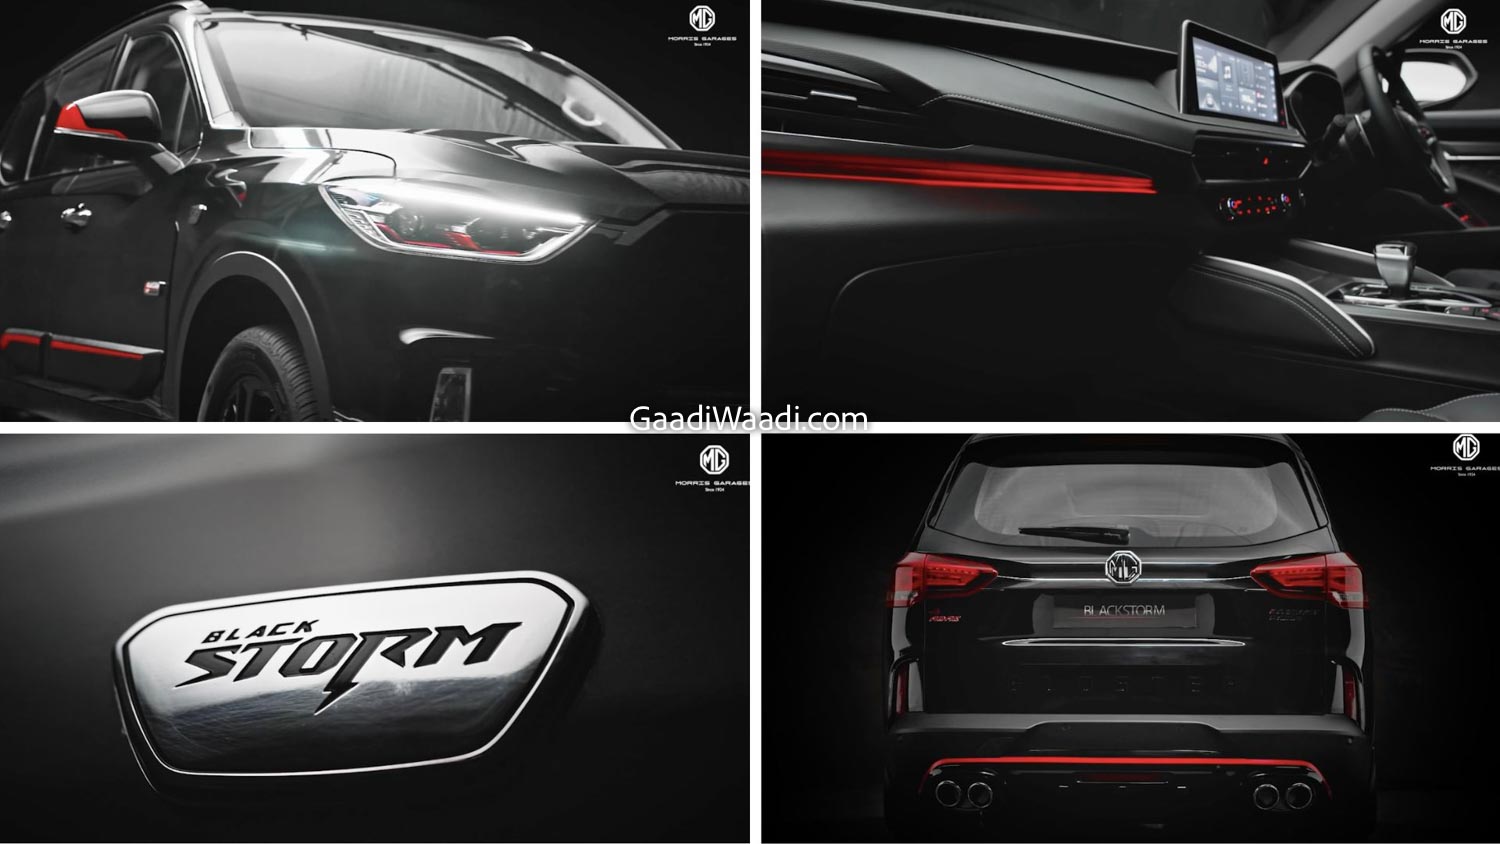 MG Gloster Black Storm Teased Revealing Exterior & Interior, Launch Soon